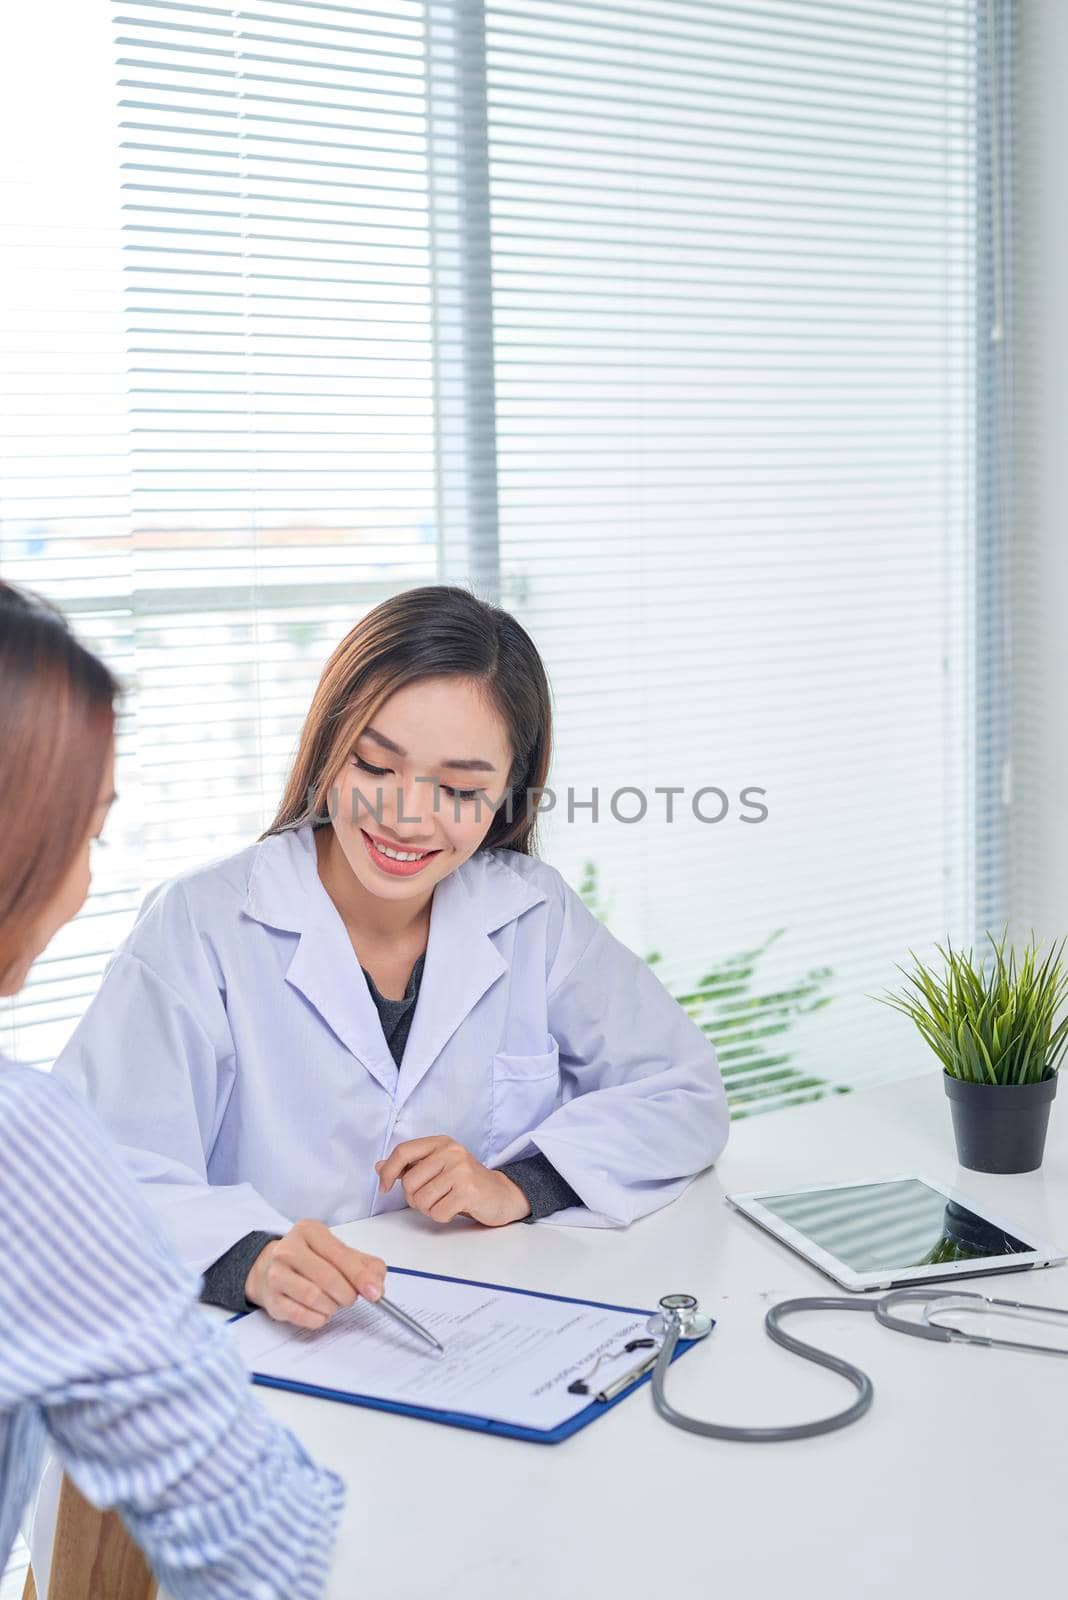 Female doctor talks to female patient in hospital office while writing on the patients health record on the table. Healthcare and medical service.  by makidotvn